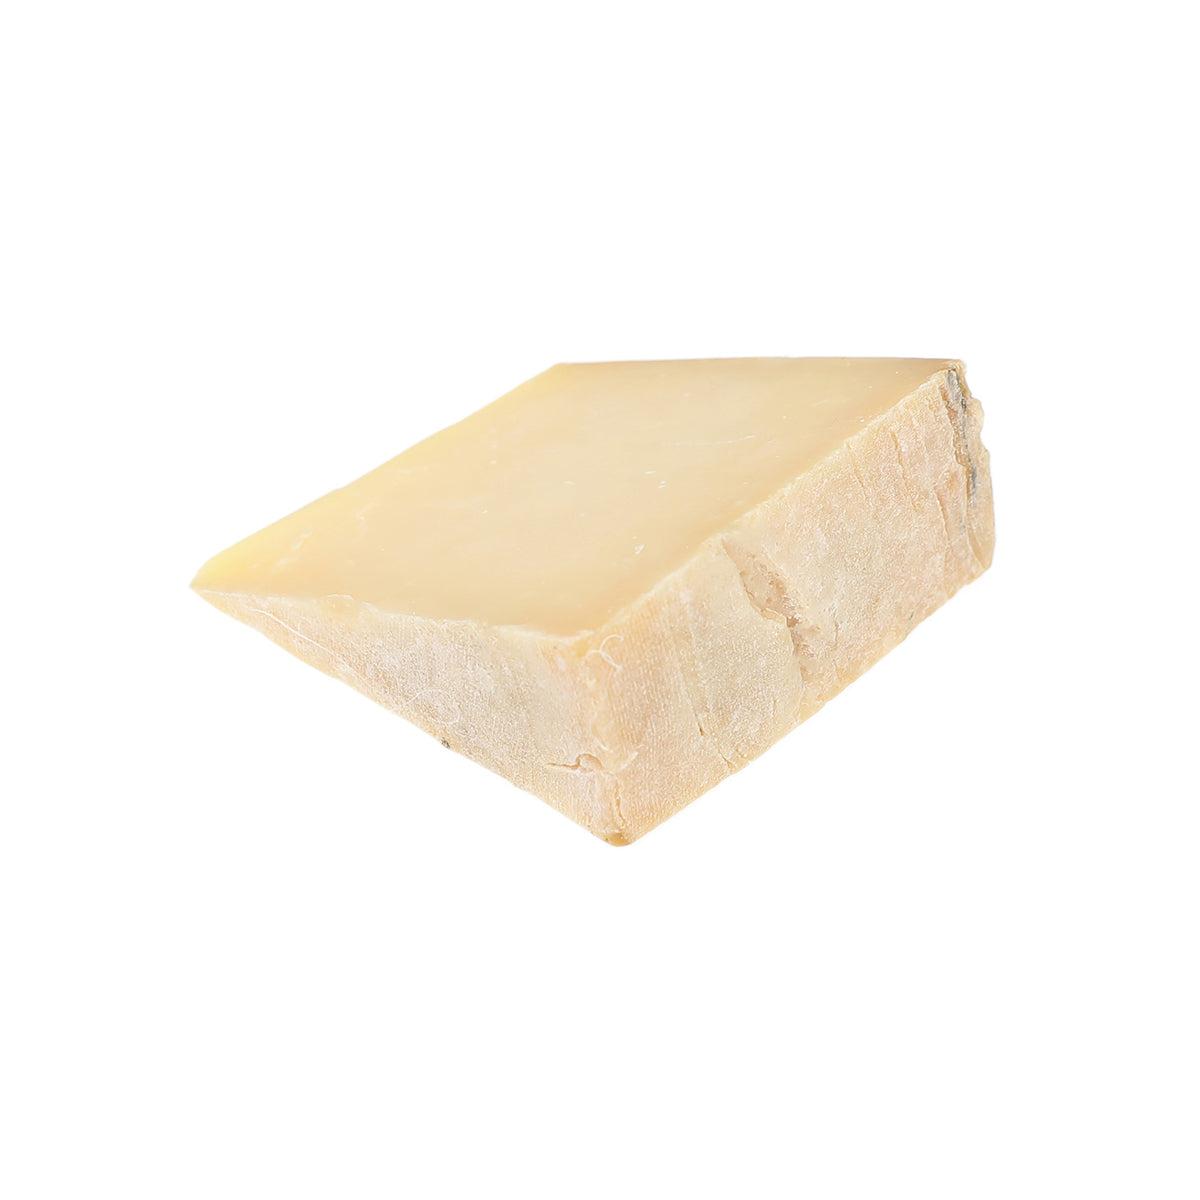 Murray's Cheese Bleu Mont Bandaged Cheddar Cheese